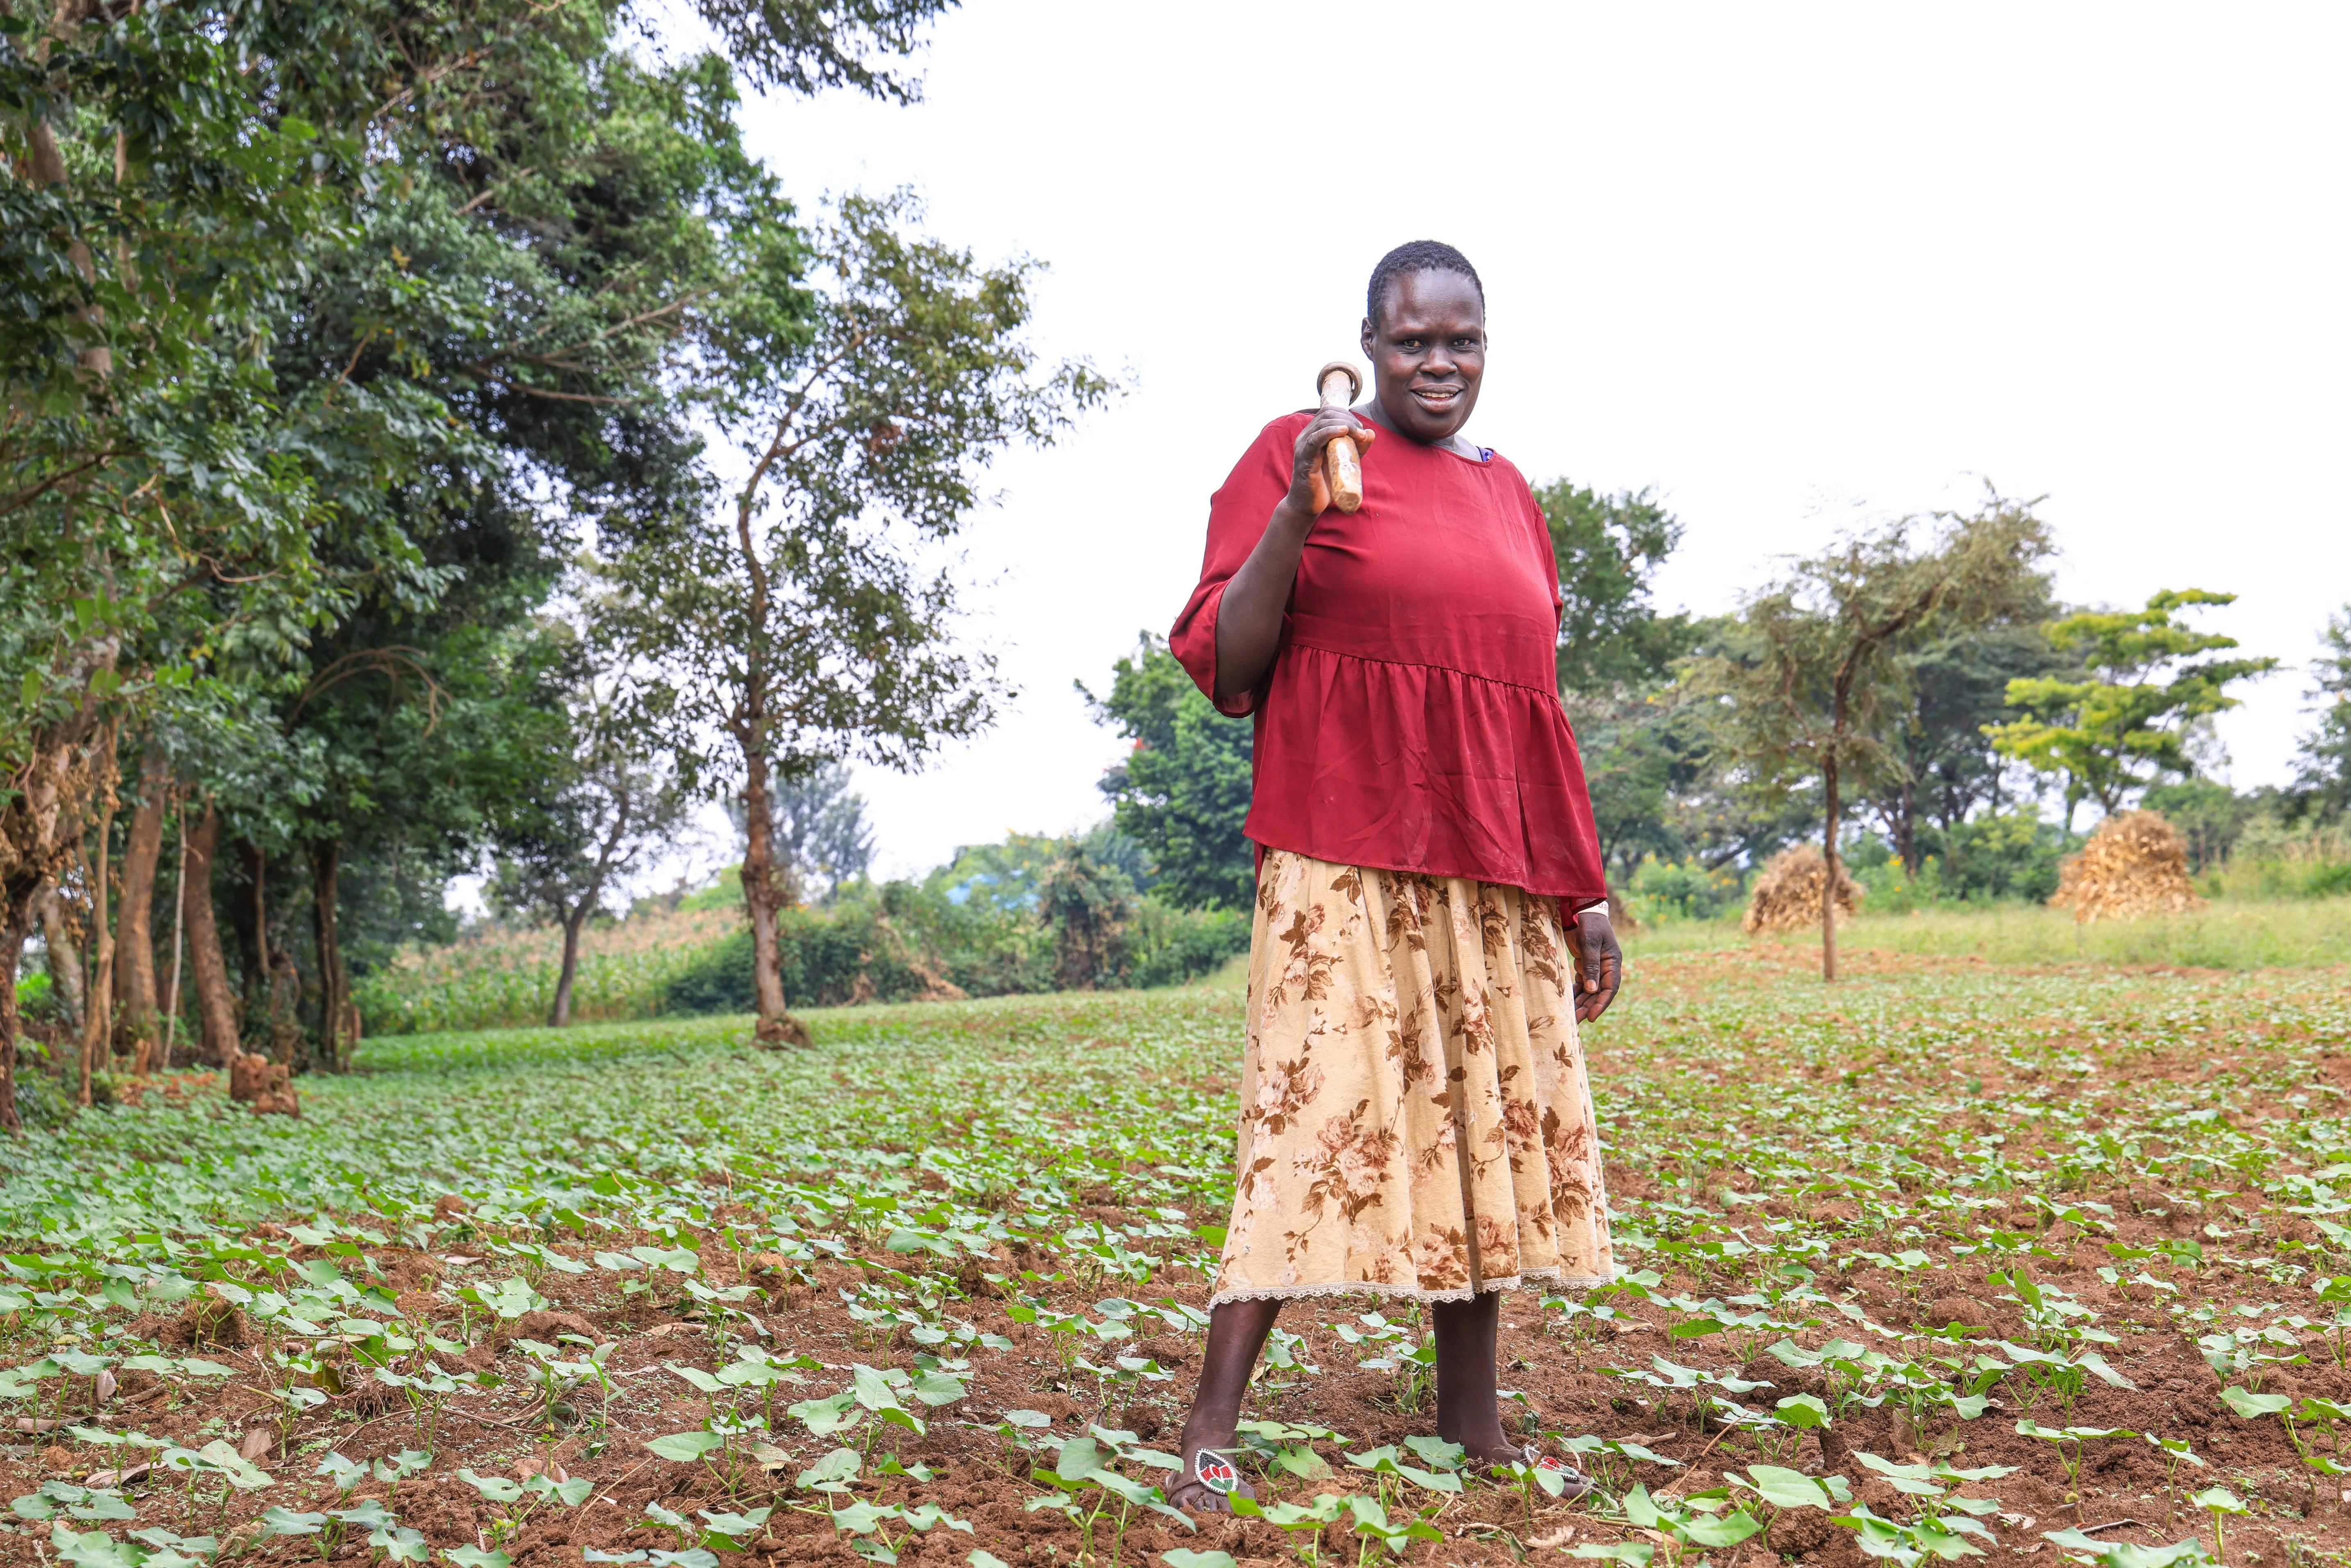 High-iron bean farmer Sarah Ikarot stands in a field where tobacco once grew